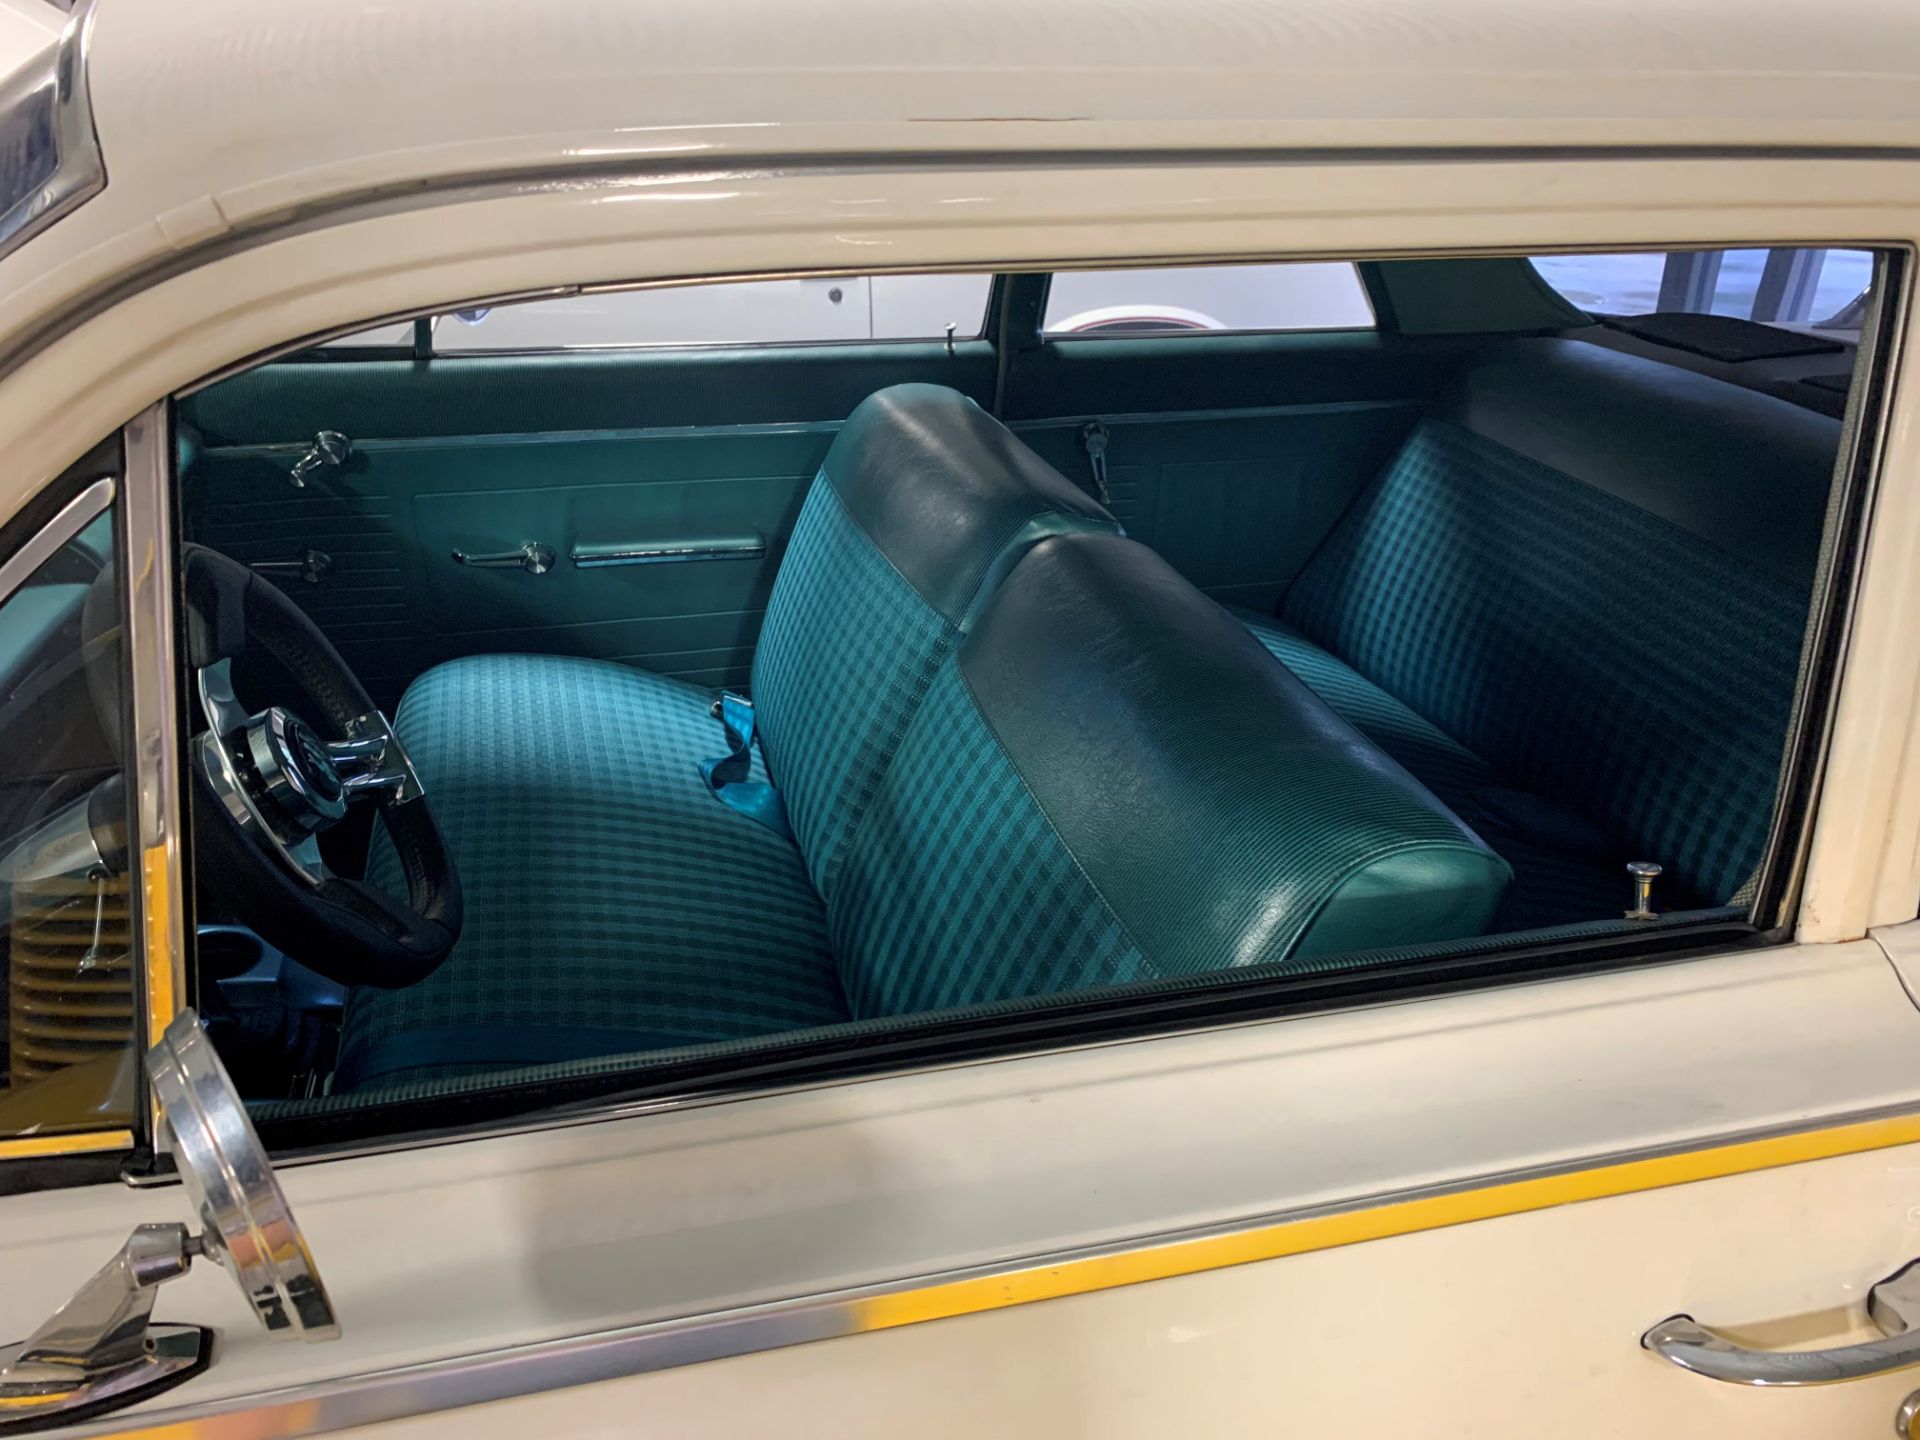 1963 Ford Galaxie 500 Sportsroof - Image 6 of 9